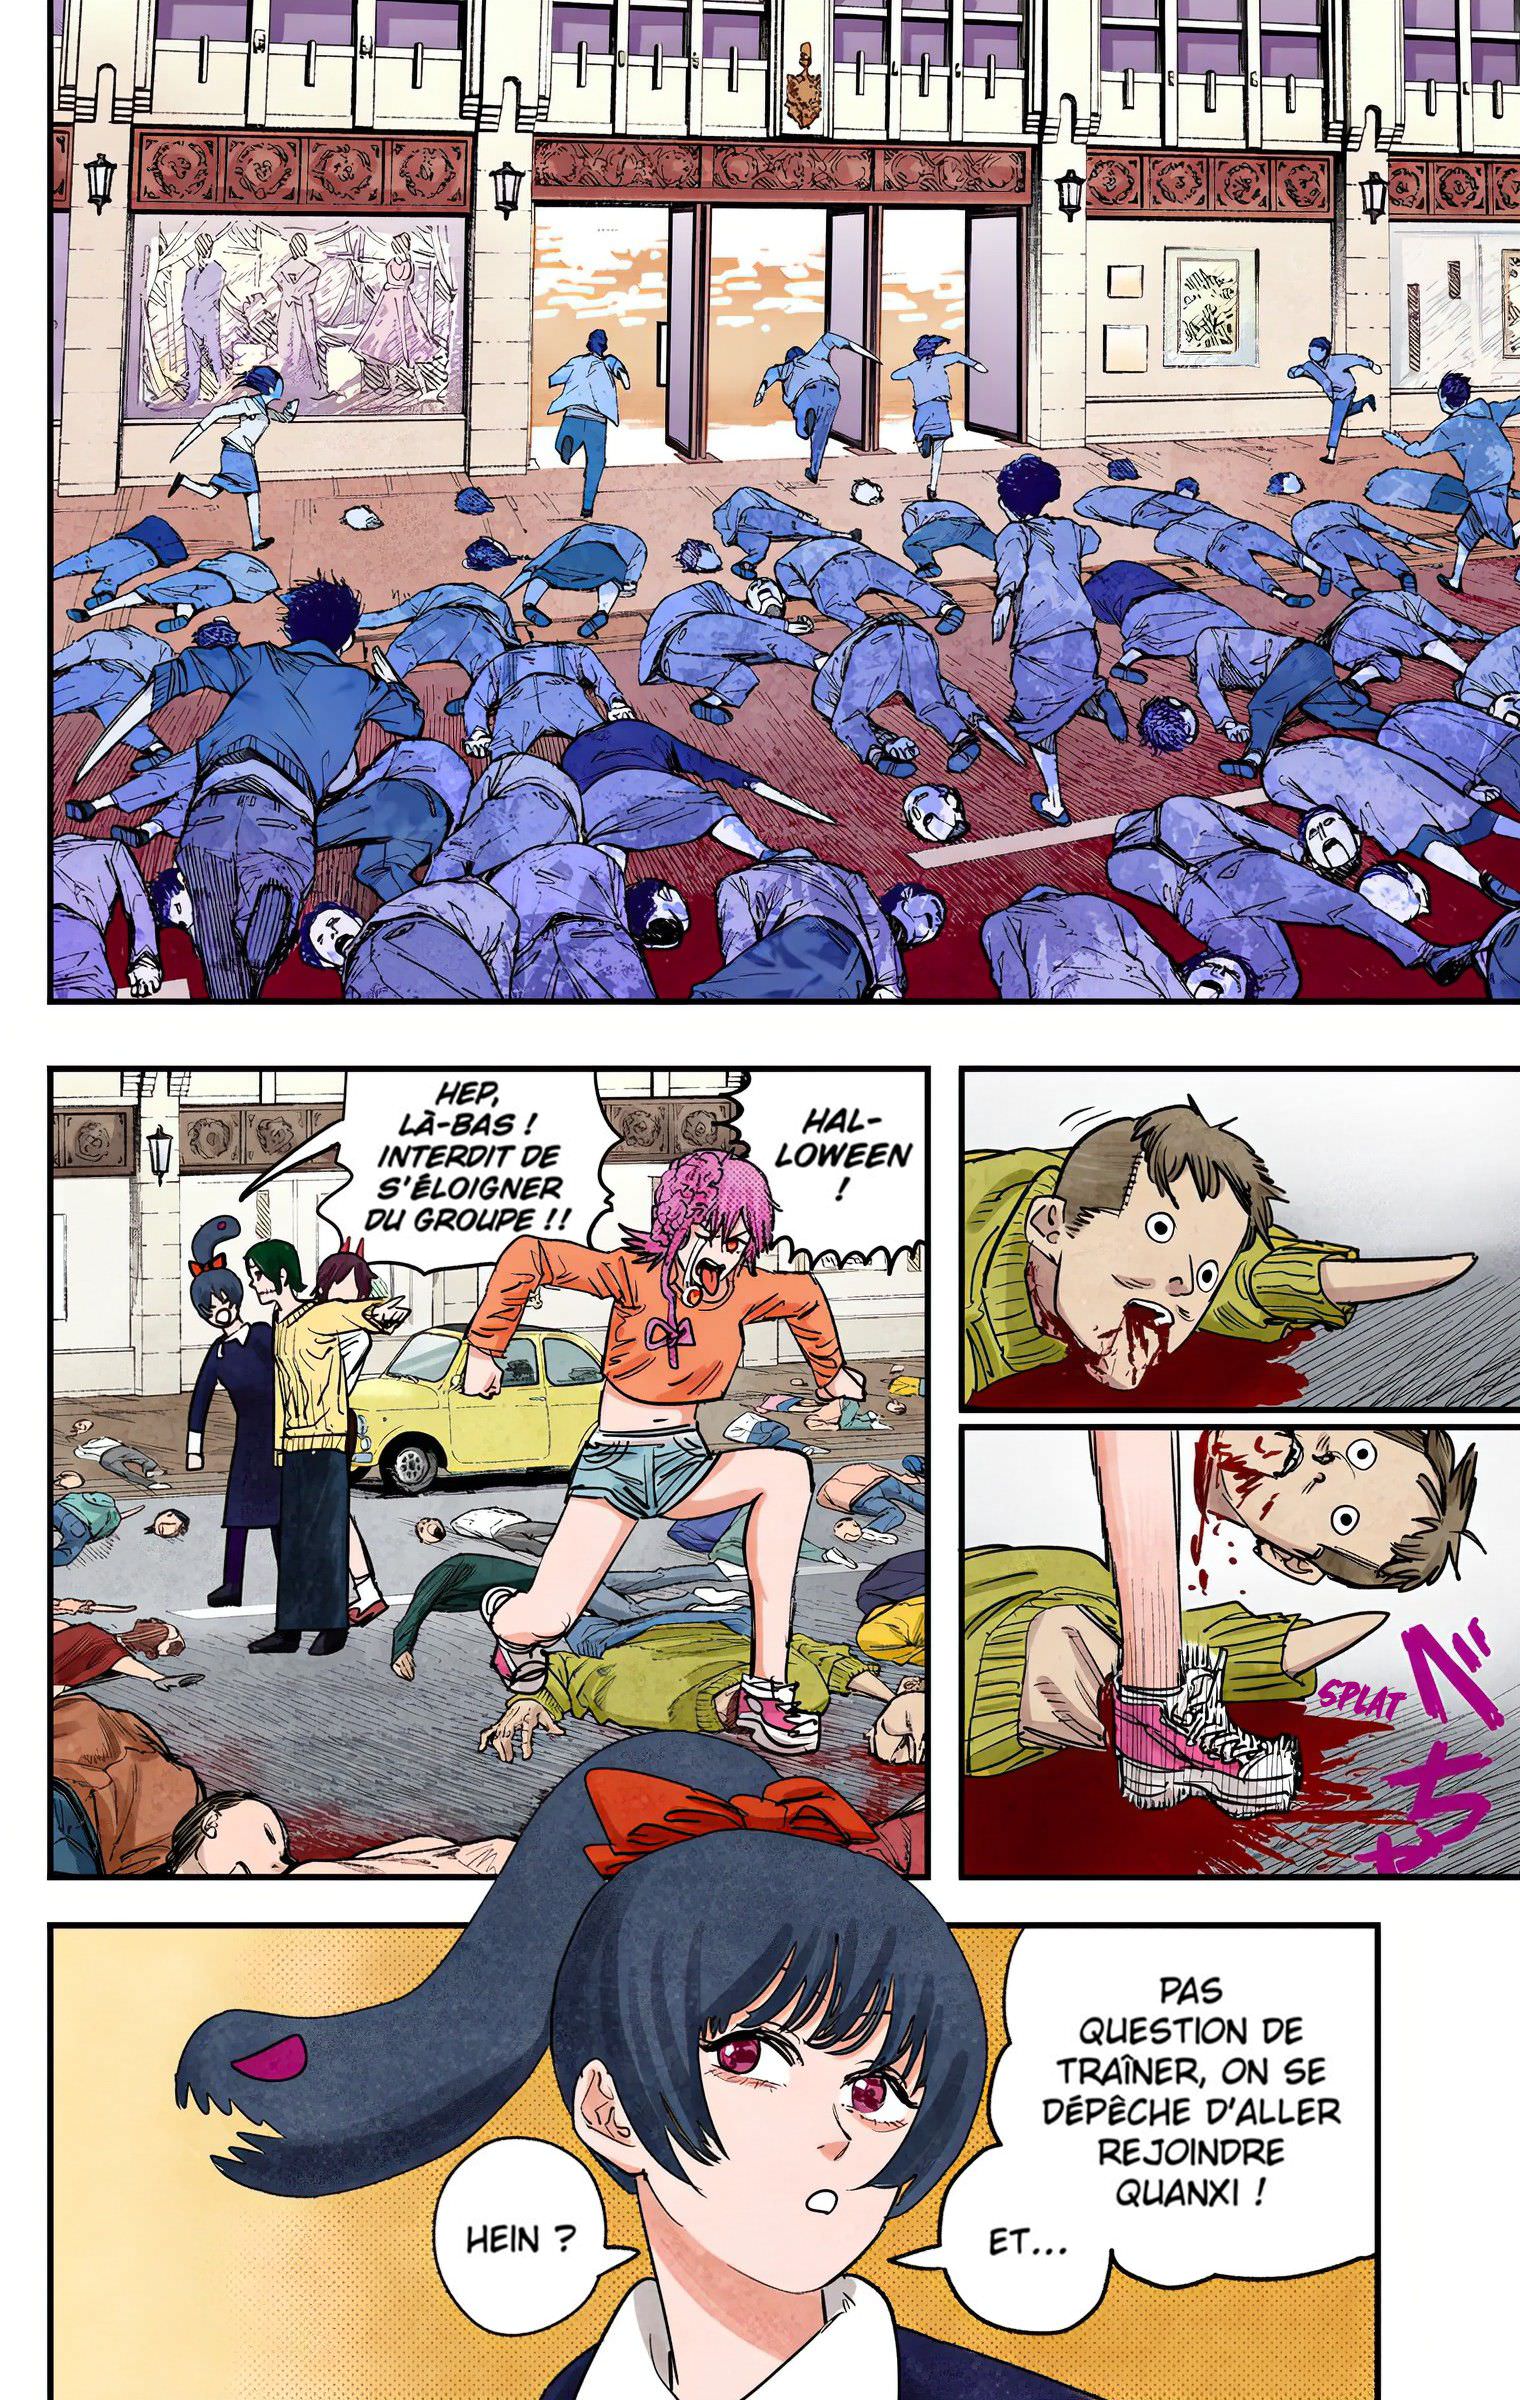 Chainsaw Man - Digital Colored Comics: Chapter 61 - Page 1